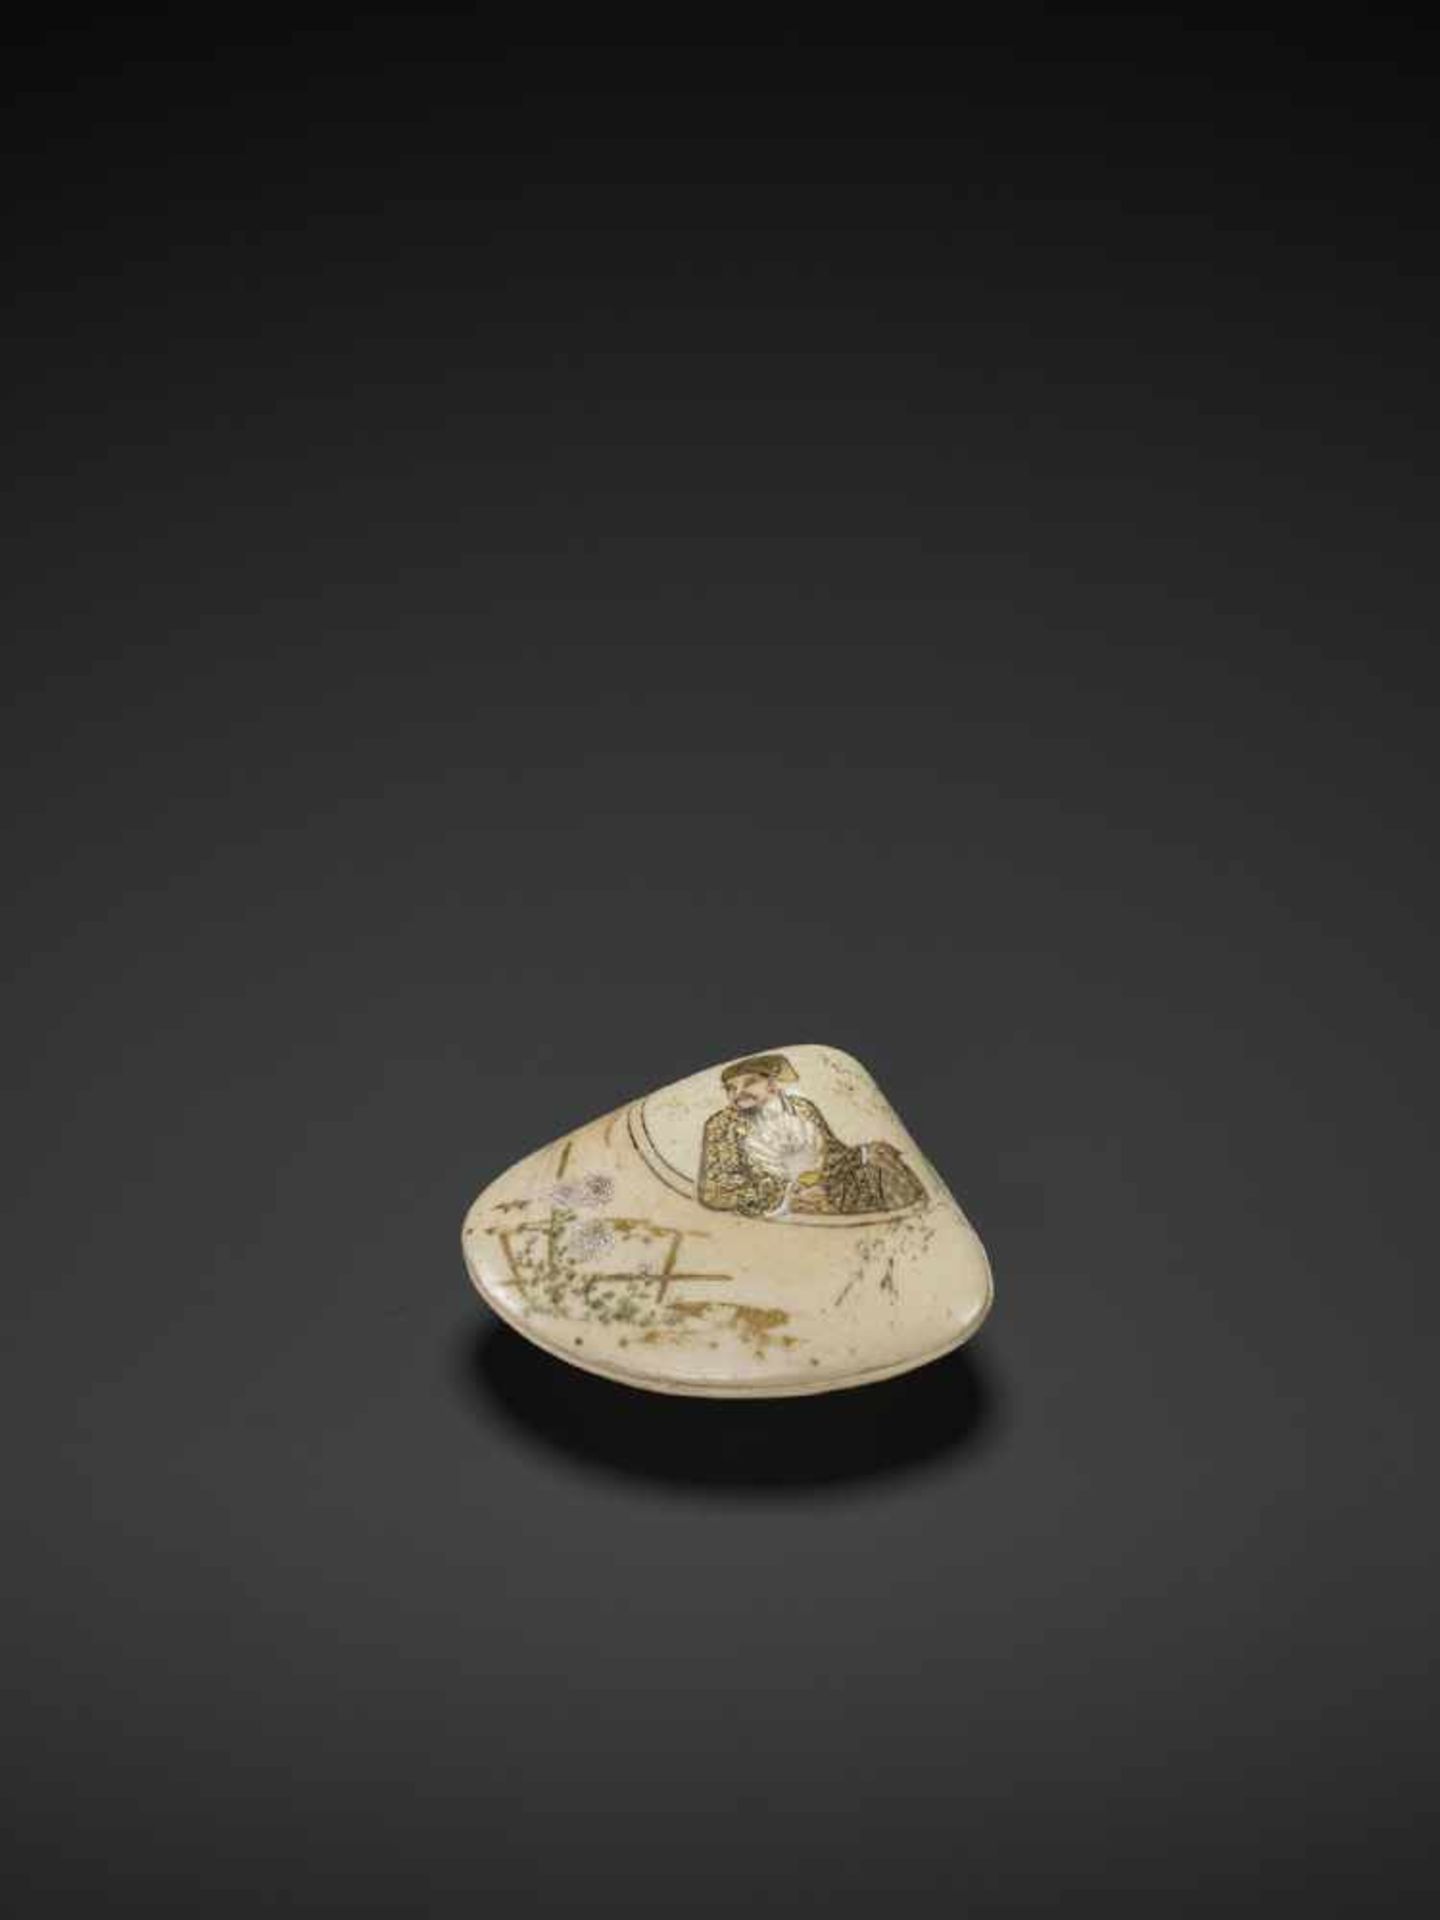 A SATSUMA CERAMIC SHELL BOX Japan, Meiji period (1868-1912)Finely painted in gold and polychrome - Image 3 of 9